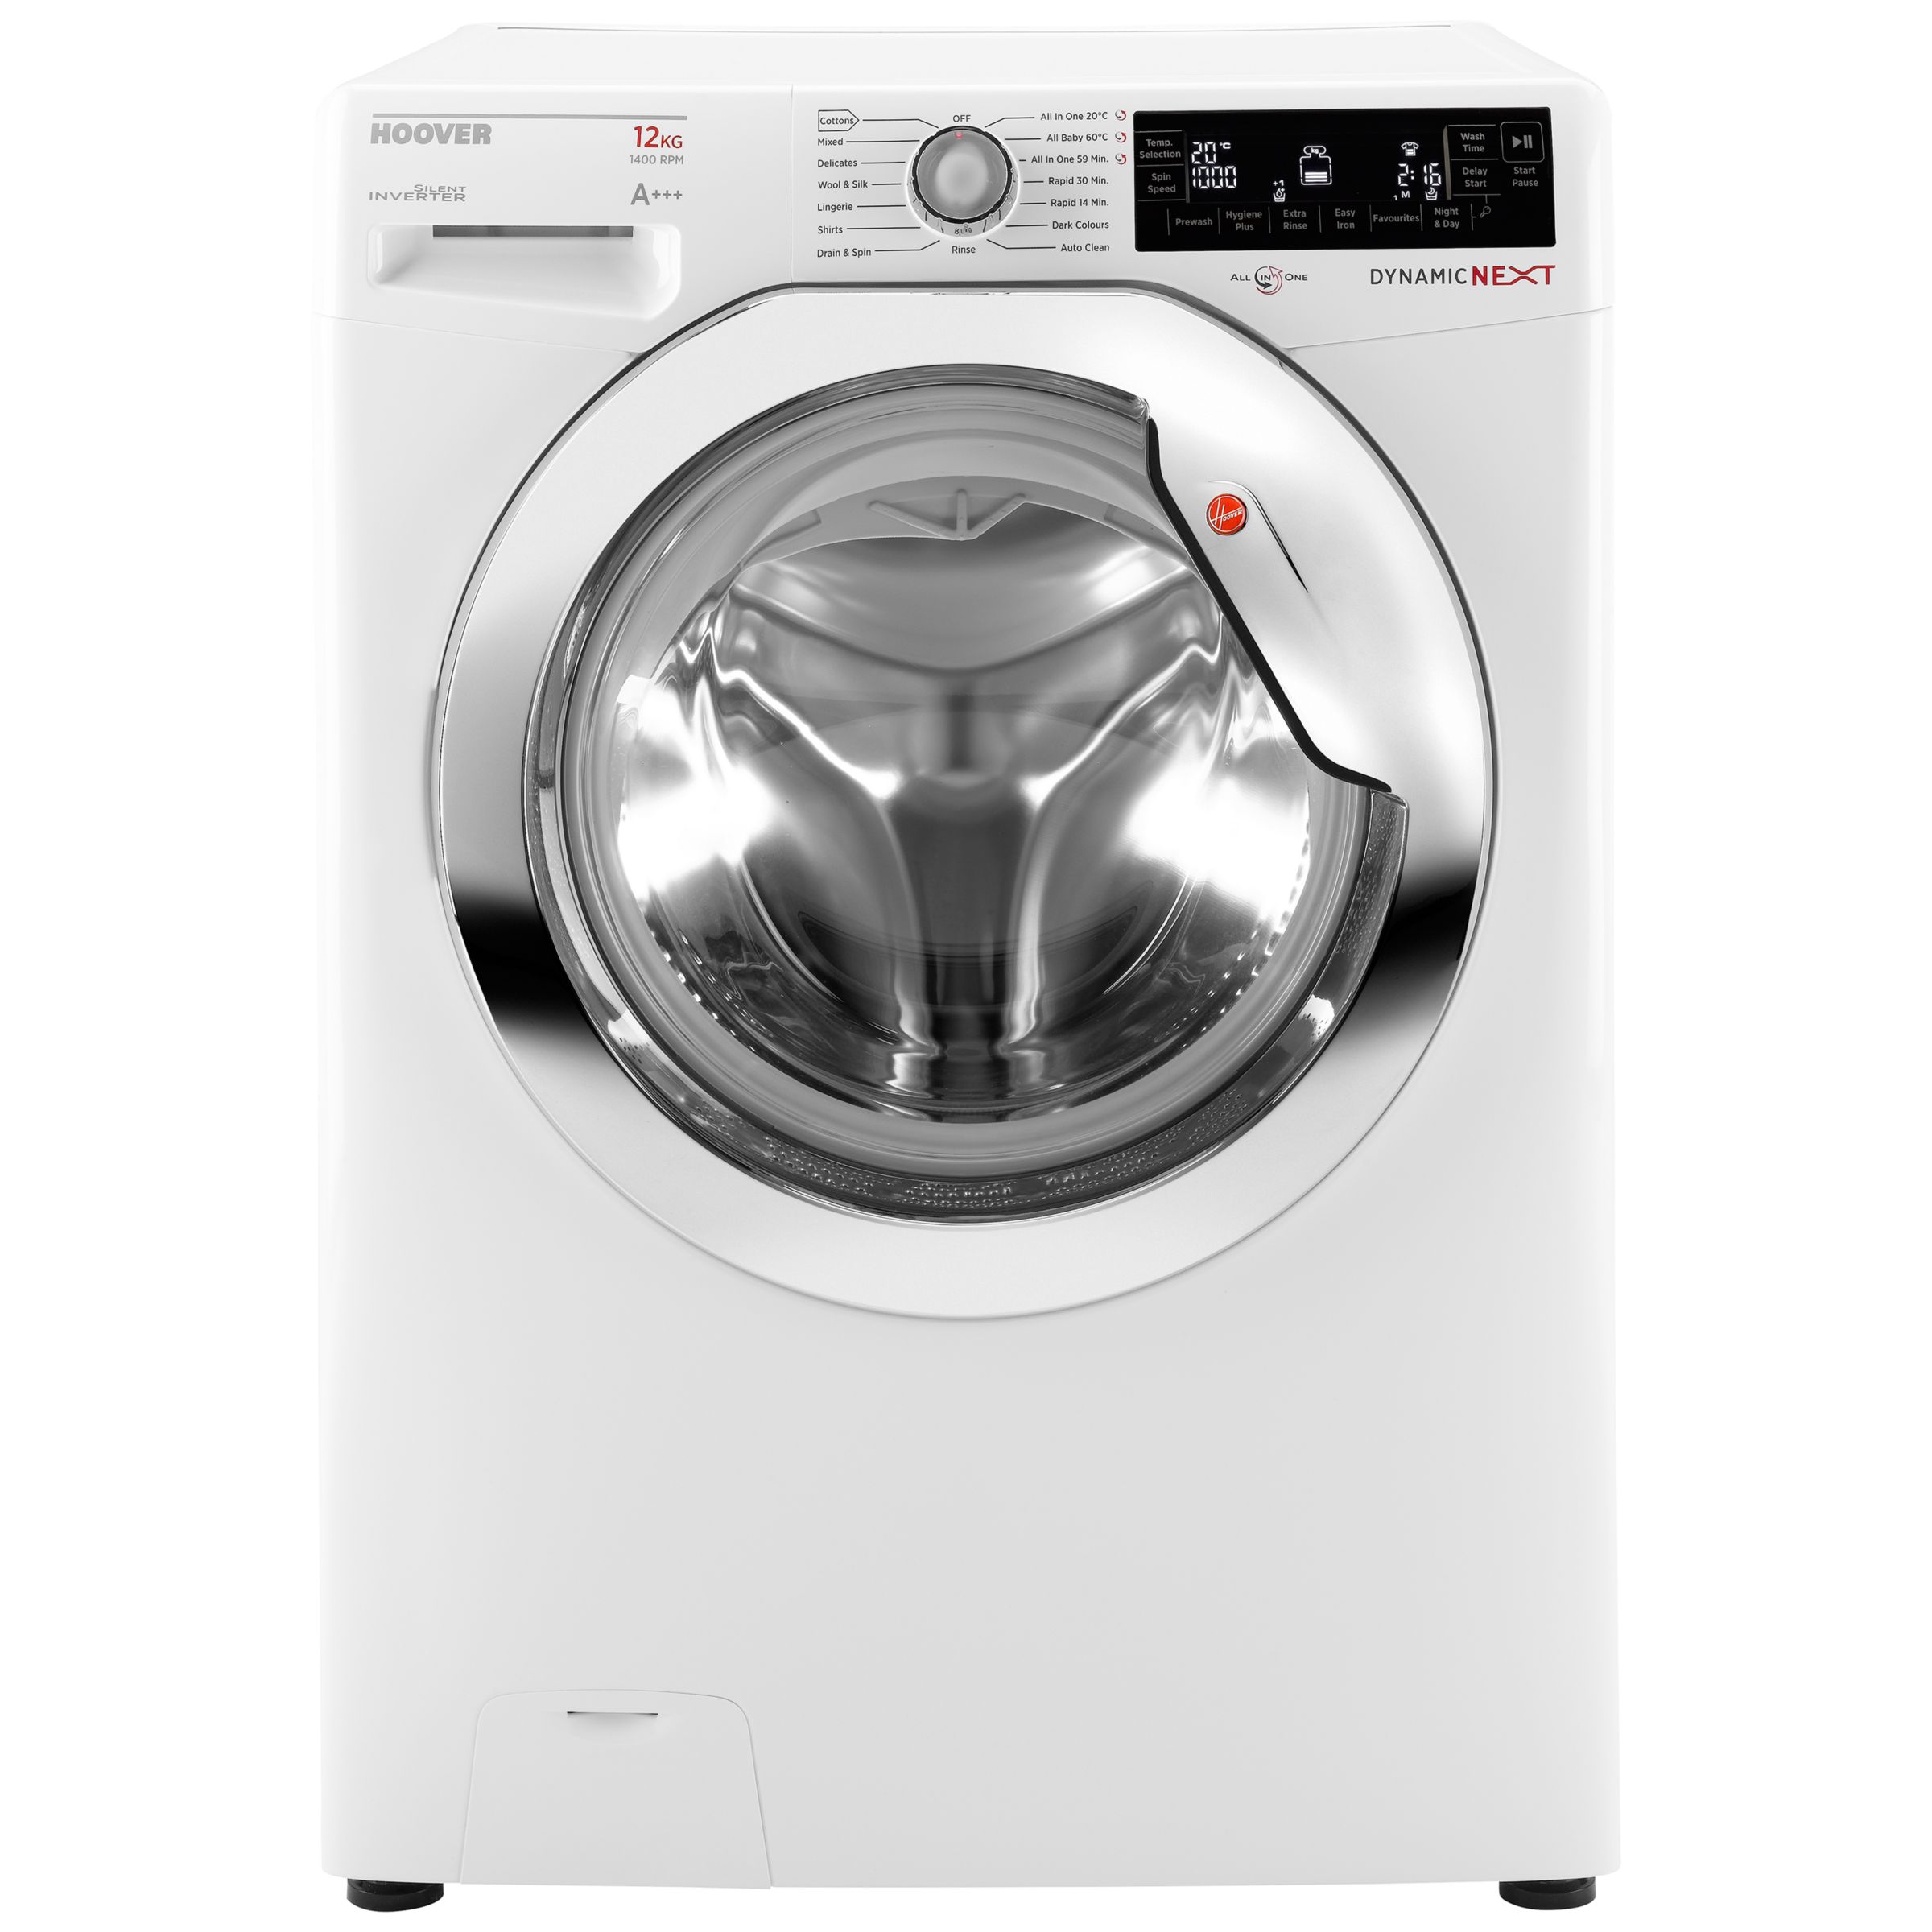 Hoover Dynamic Next Premium DXP 412AIW3 Freestanding Washing Machine, 12kg Load, A+++ Energy Rating, 1400rpm Spin, White/Chrome